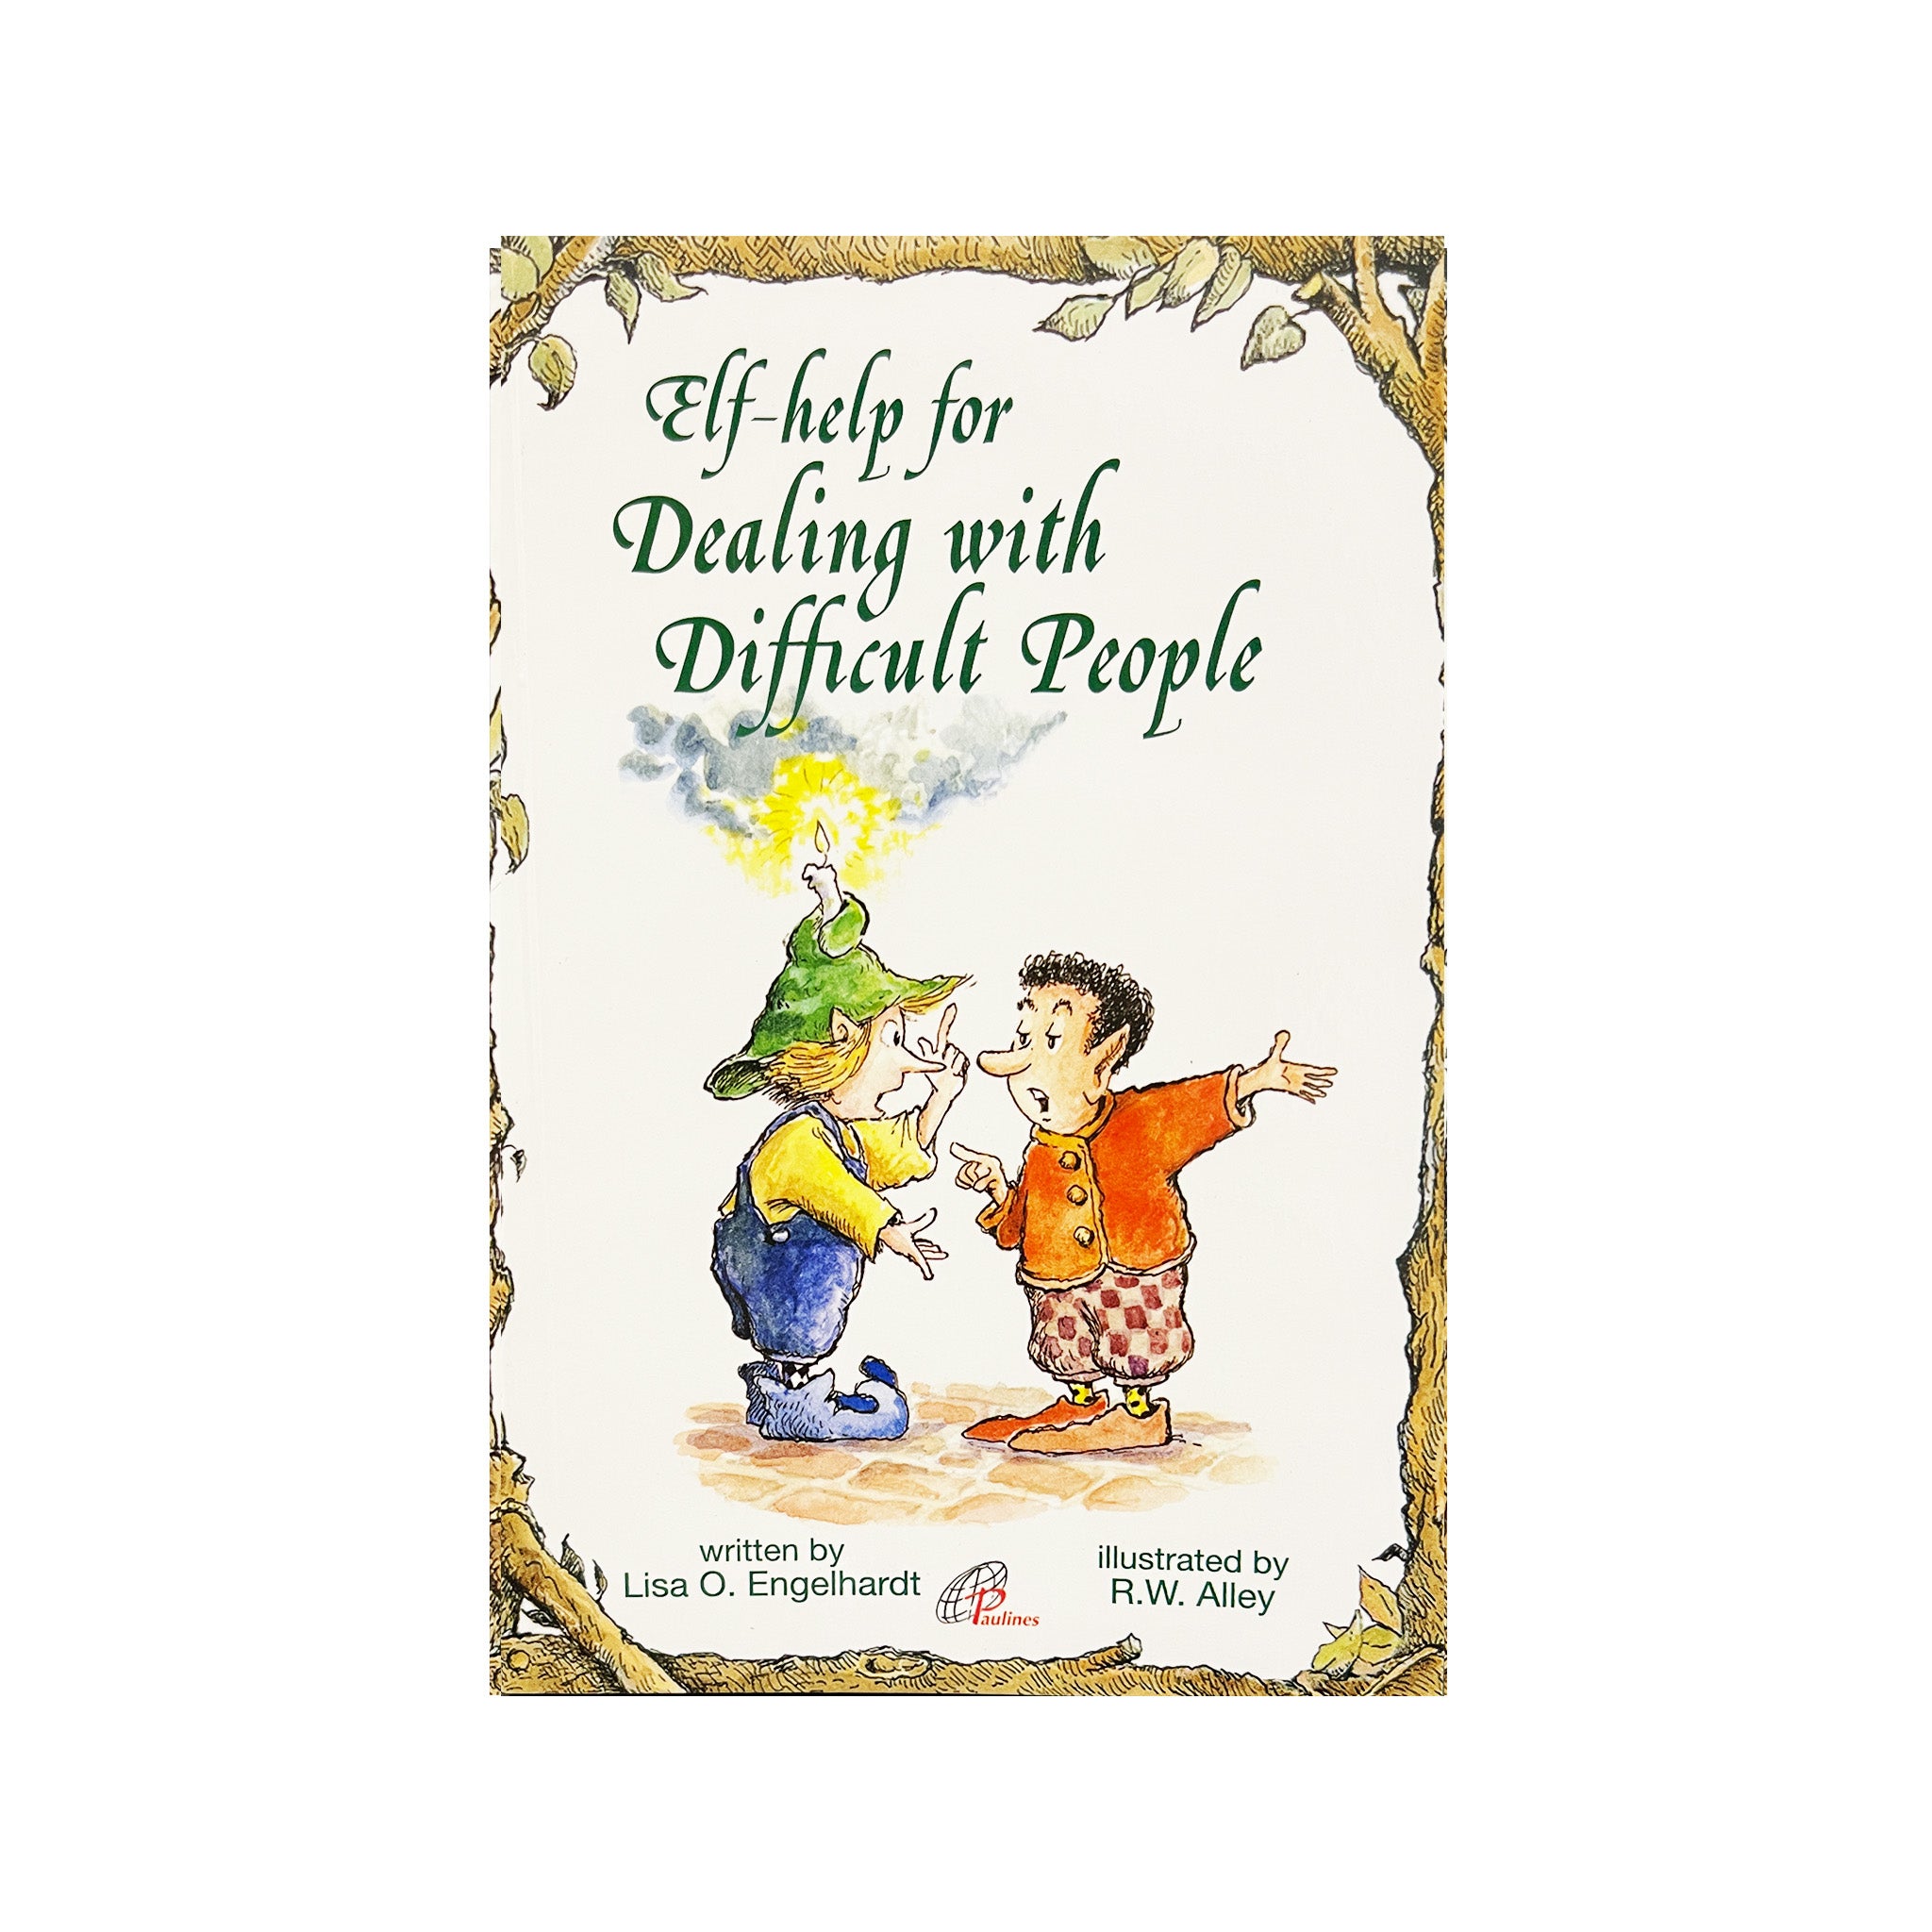 ELF HELP - DEALING WITH DIFFICULT PEOPLE